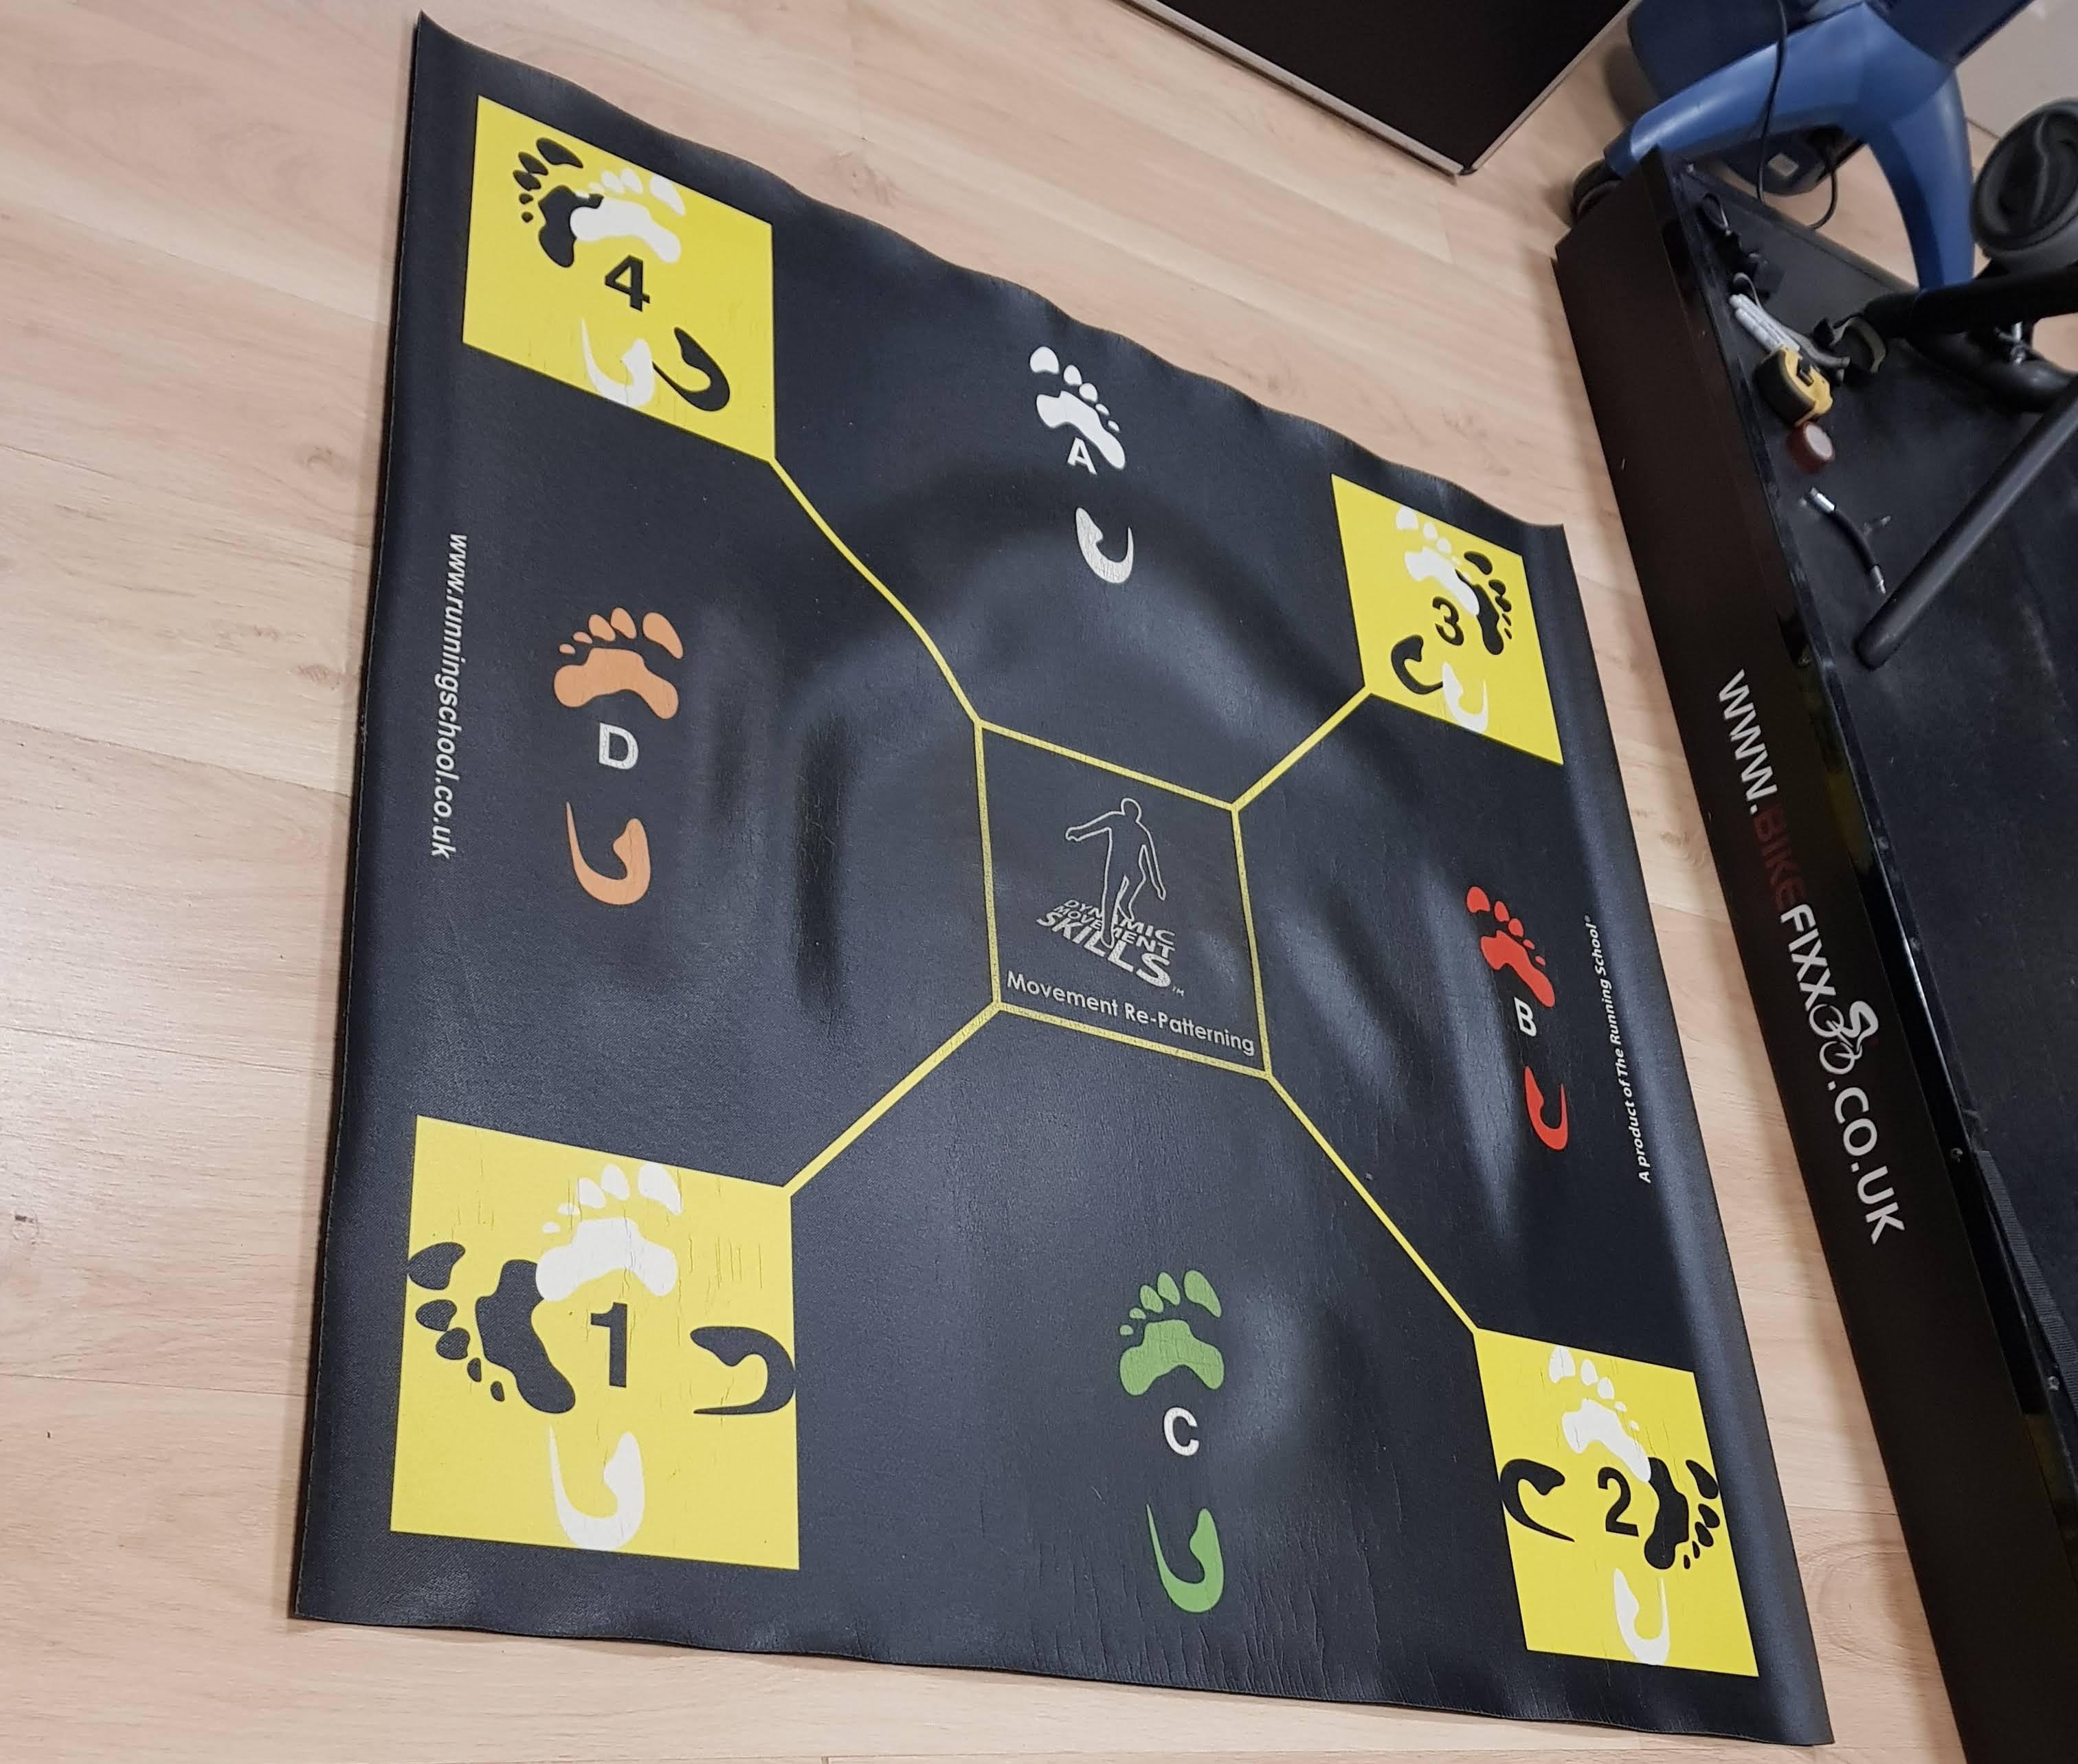 A dynamic running skills mat with four corners and a central square.